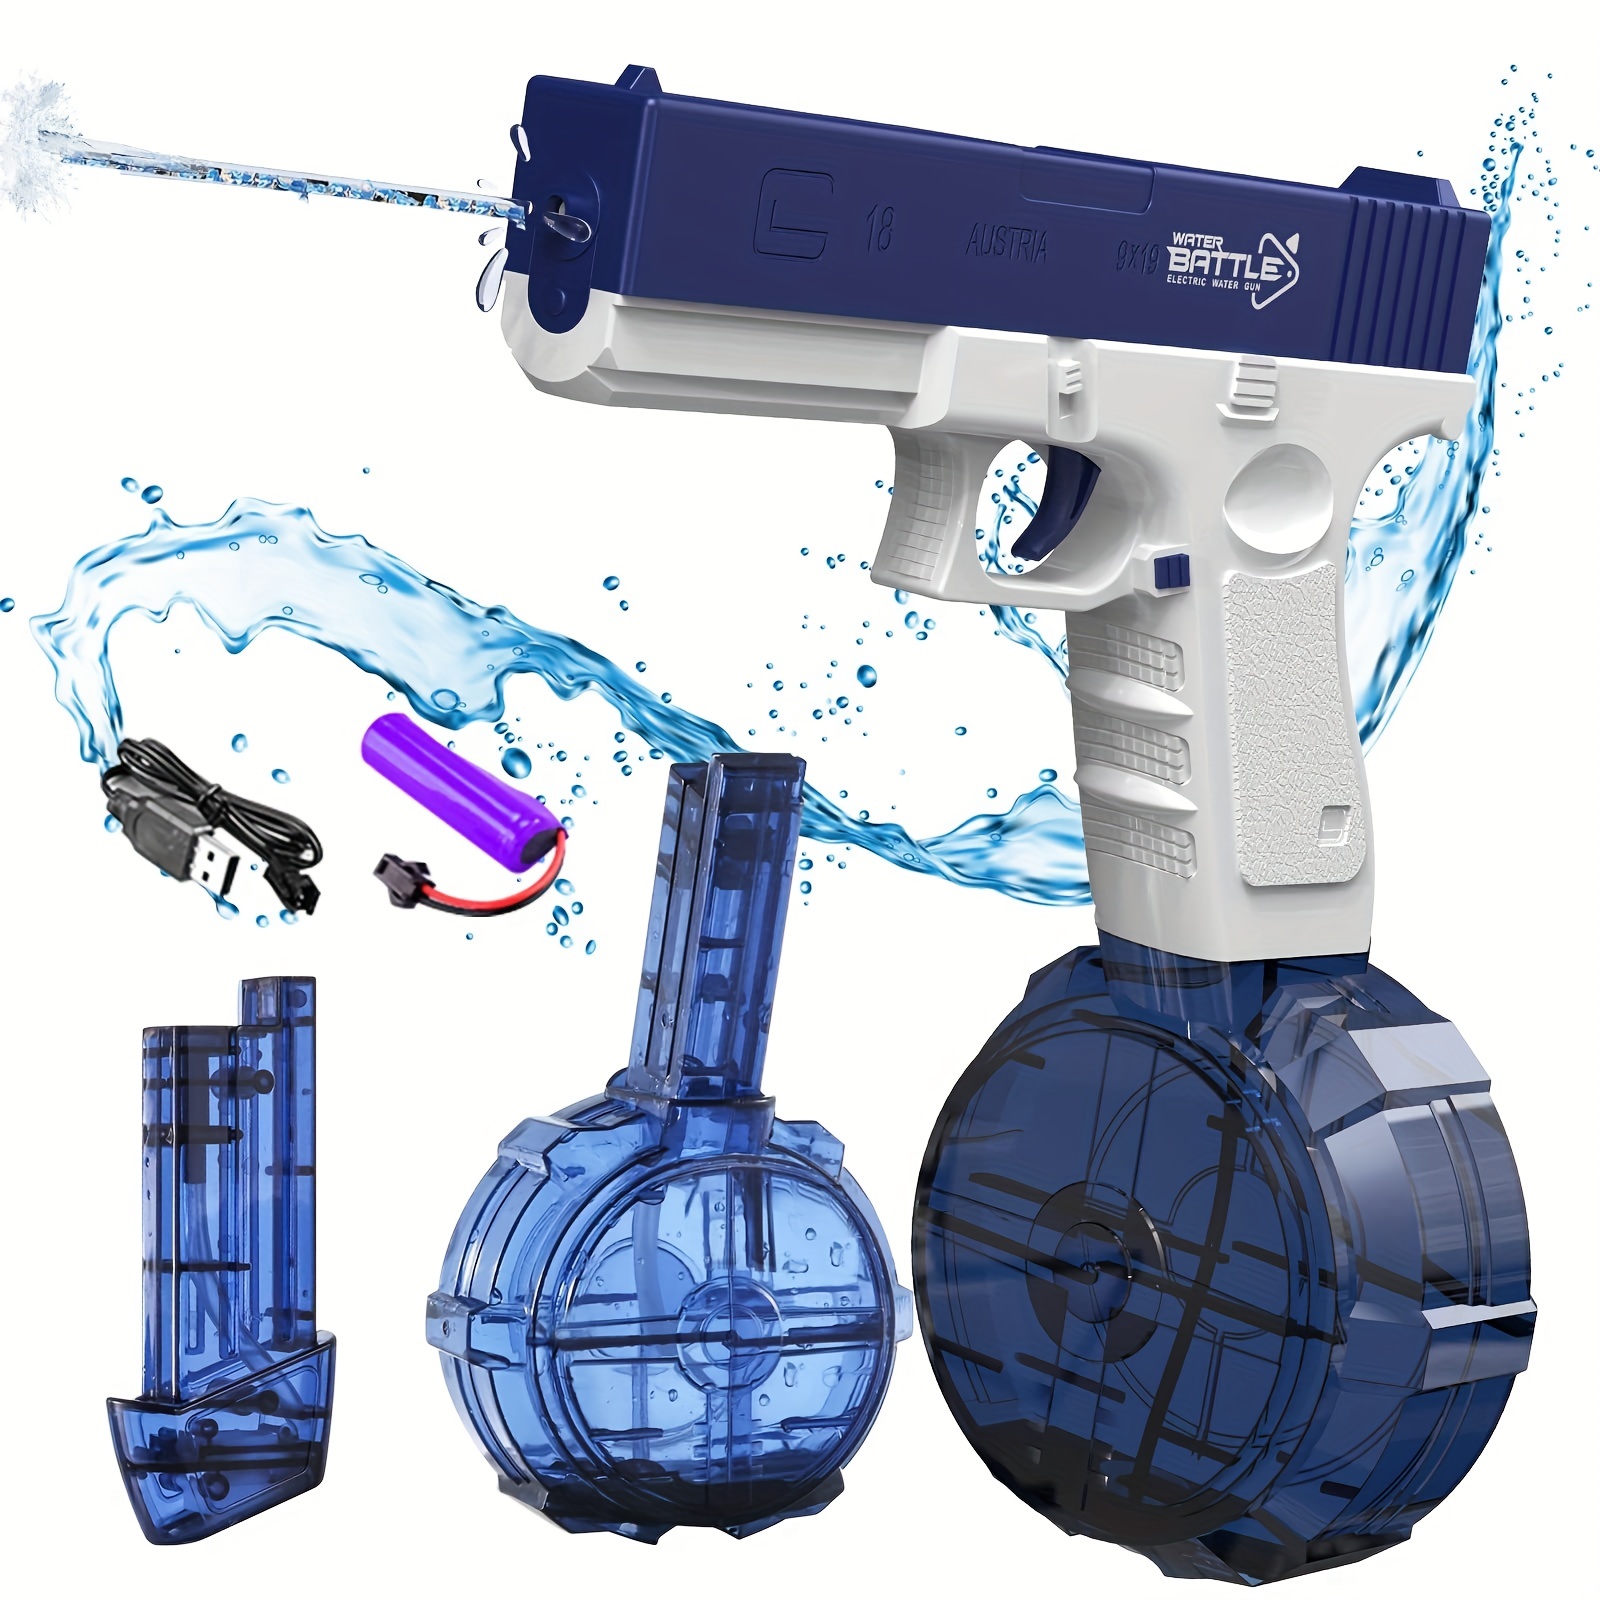 Electric Water Gun for Kids Squirt Automatic Water Absorption